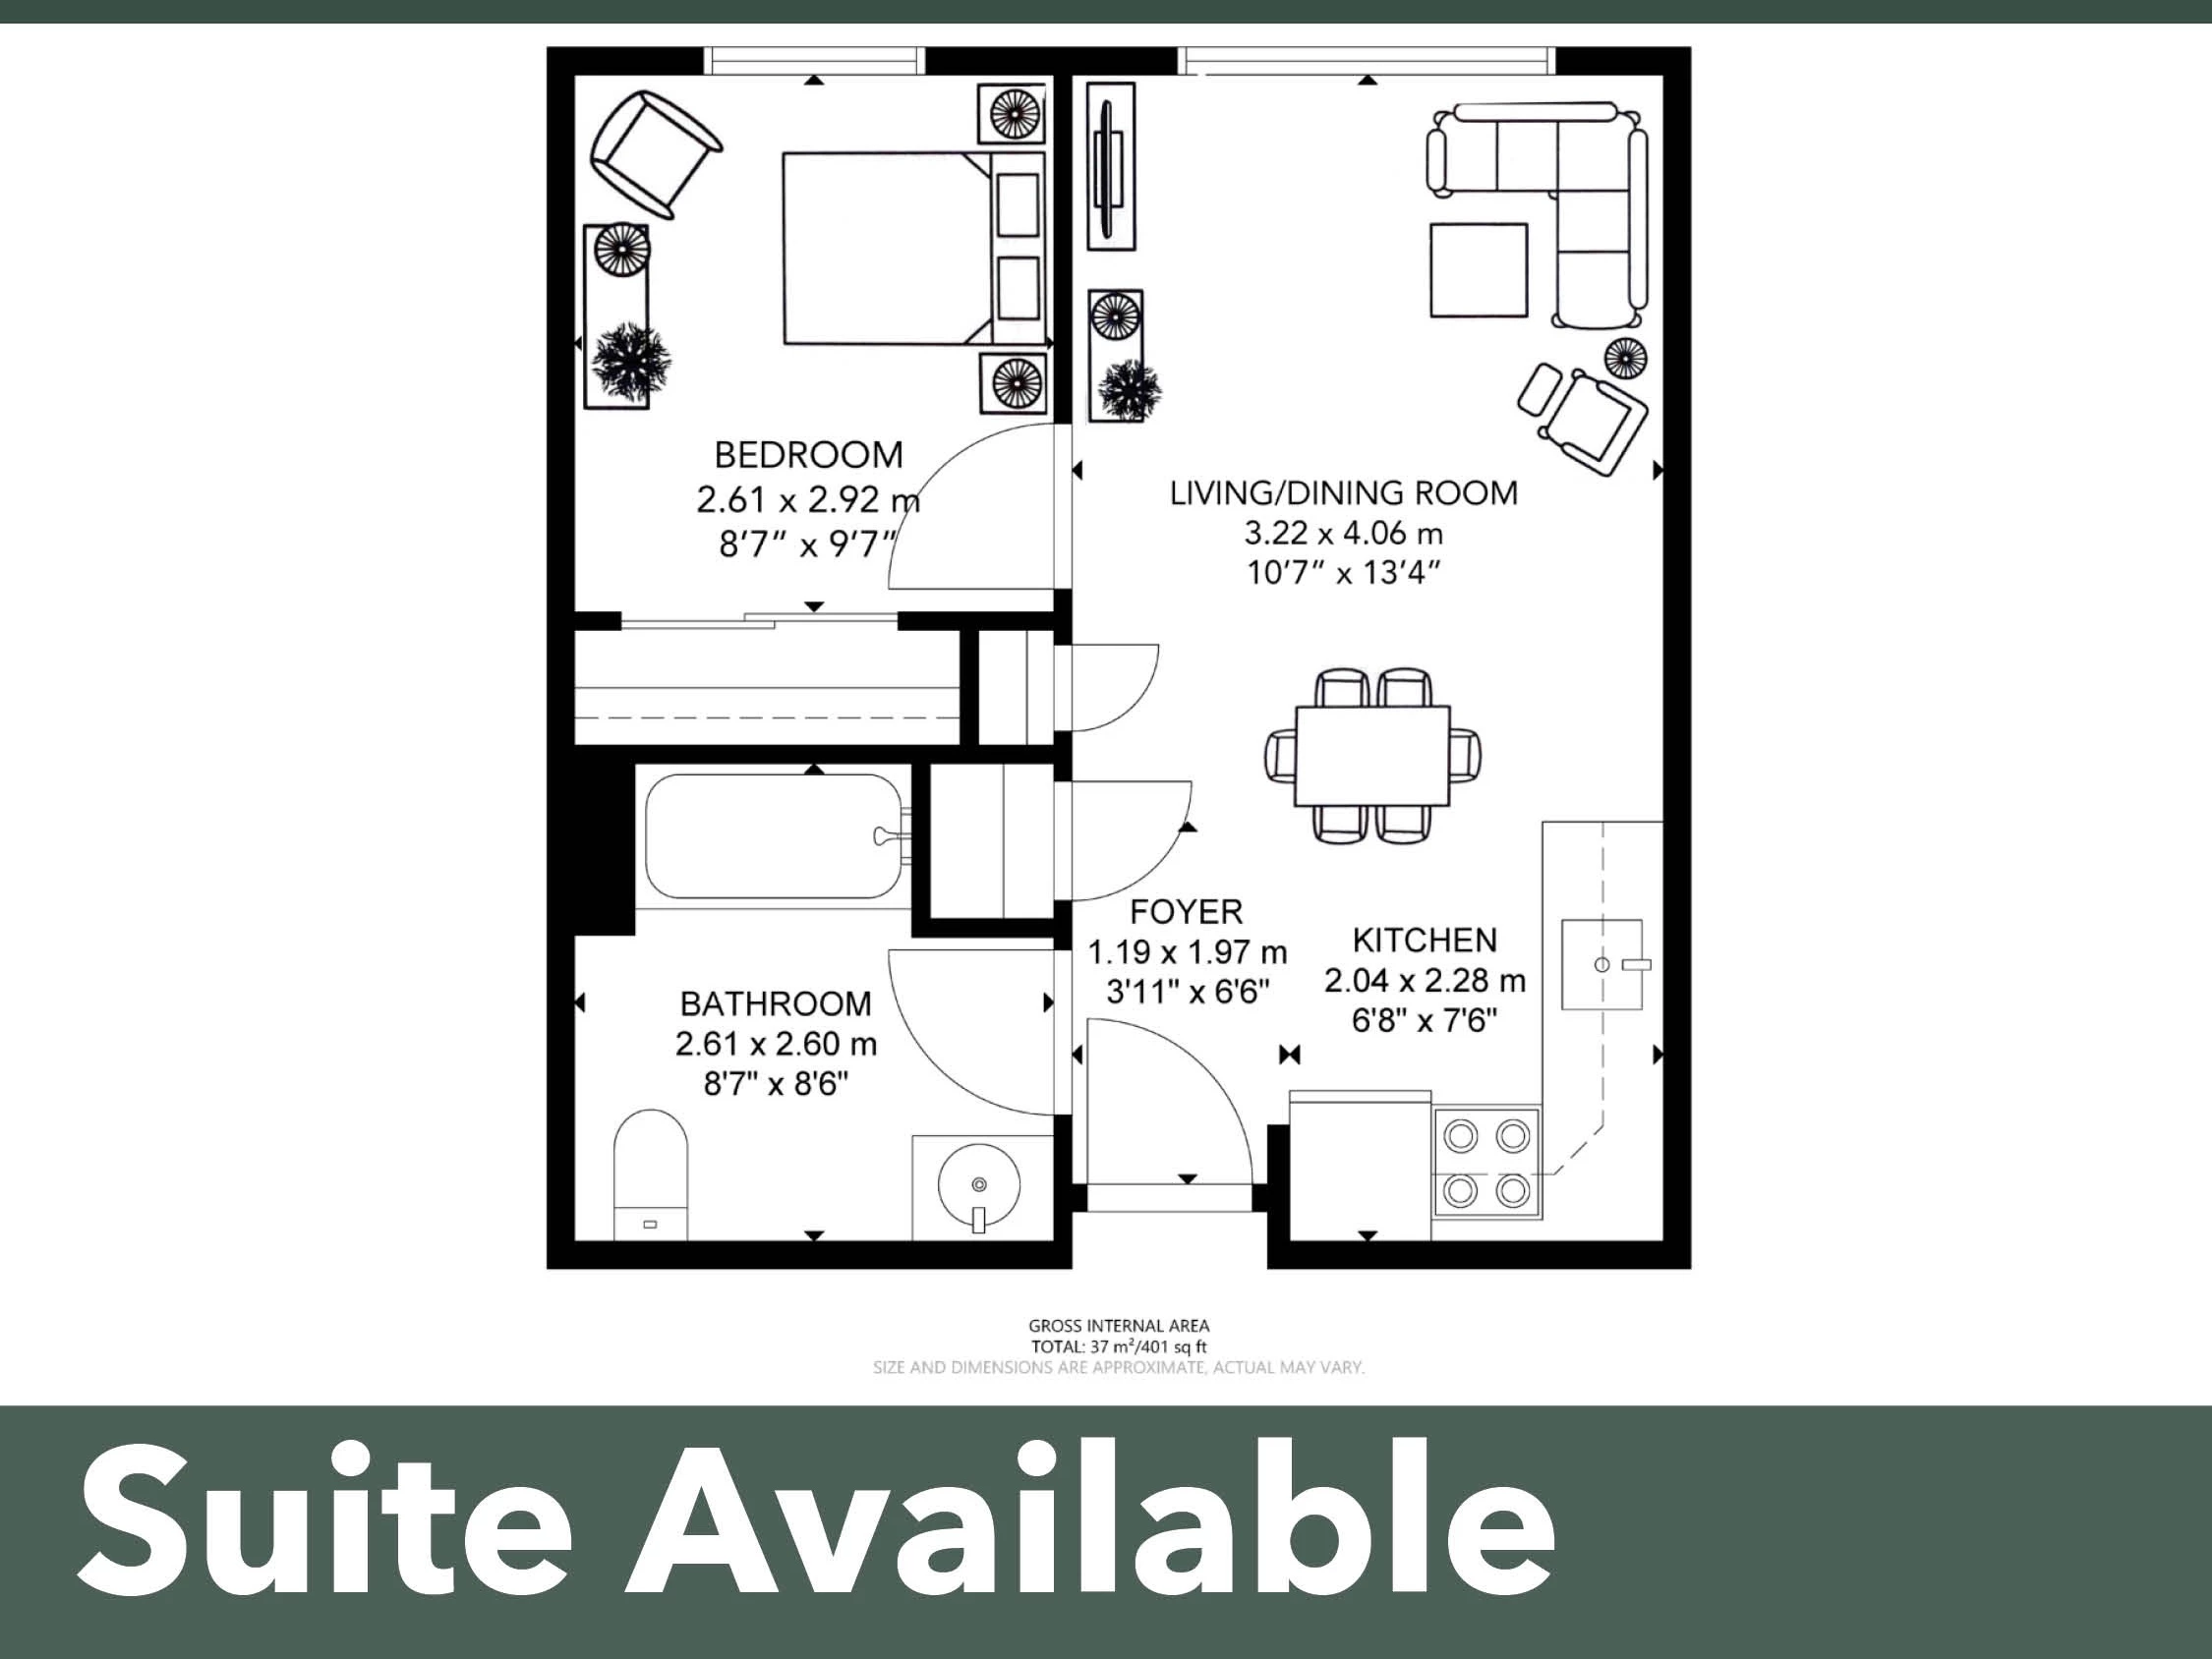 Suite plans showing the size and space of the suite. It features a bedroom, a living room, dining area, kitchen, and bathroom.